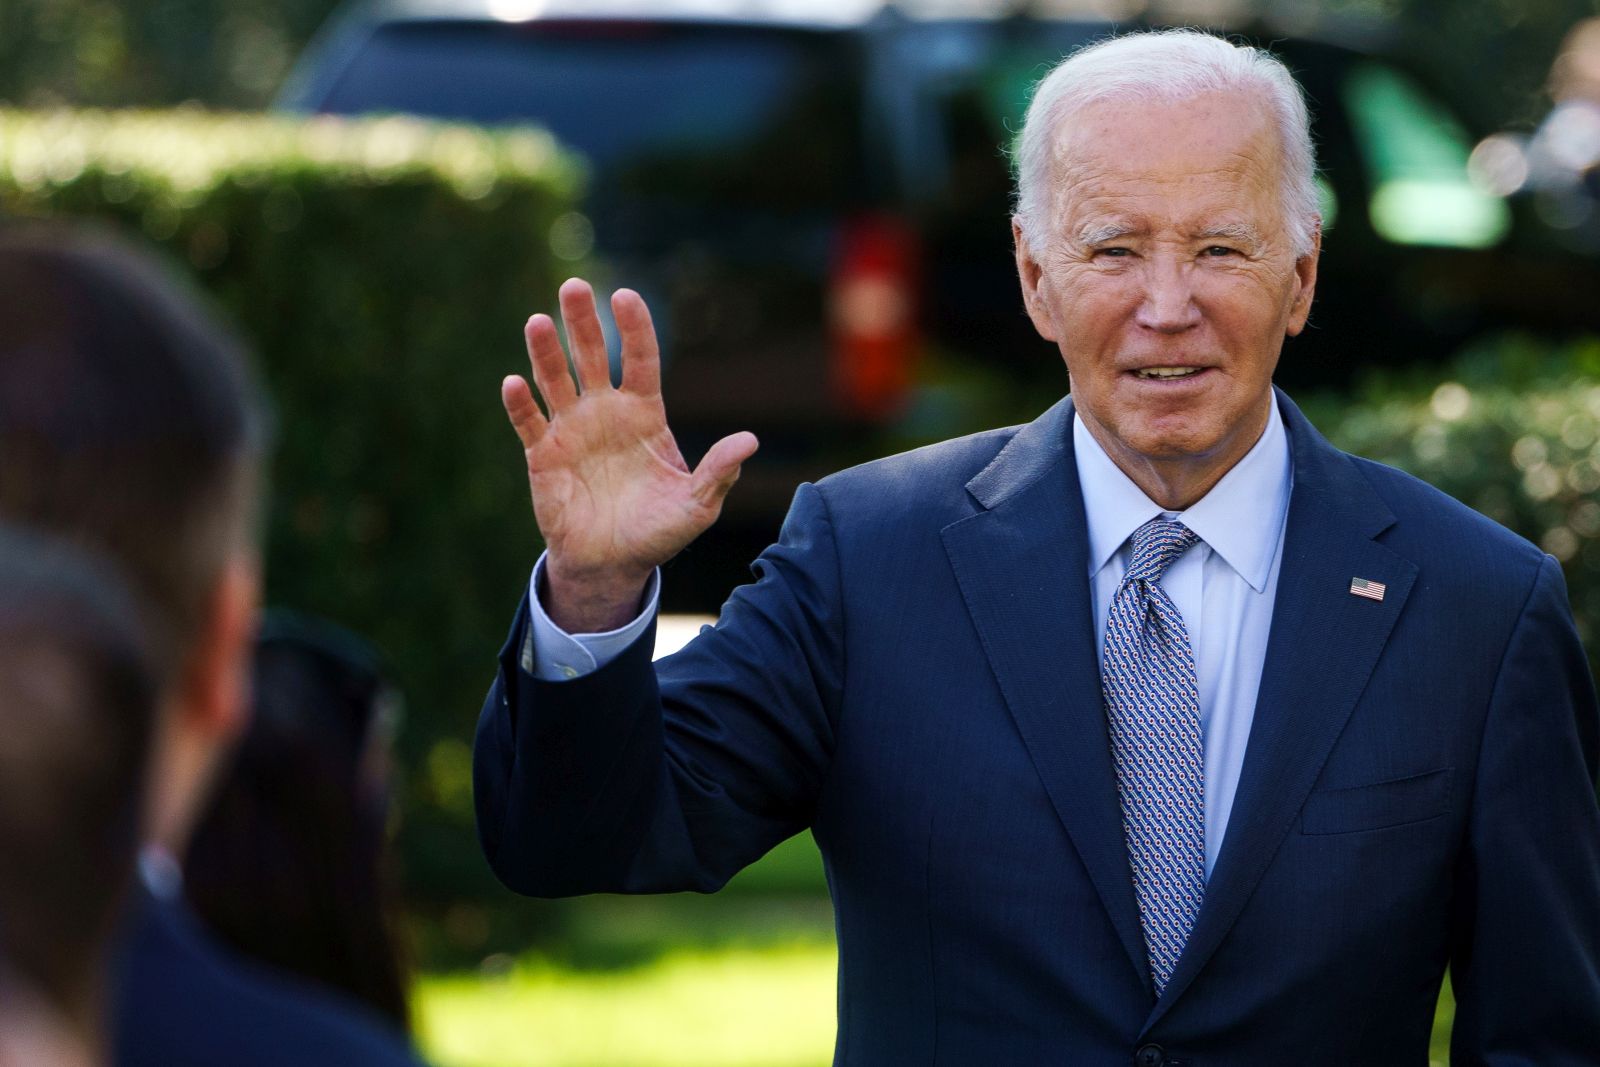 epa10913614 US President Joe Biden waves after delivering remarks on consumer protections in the Rose Garden of the White House in Washington, DC, USA, 11 October 2023. President Biden announced new measures targeted against hidden junk fees affecting consumers.  EPA/WILL OLIVER